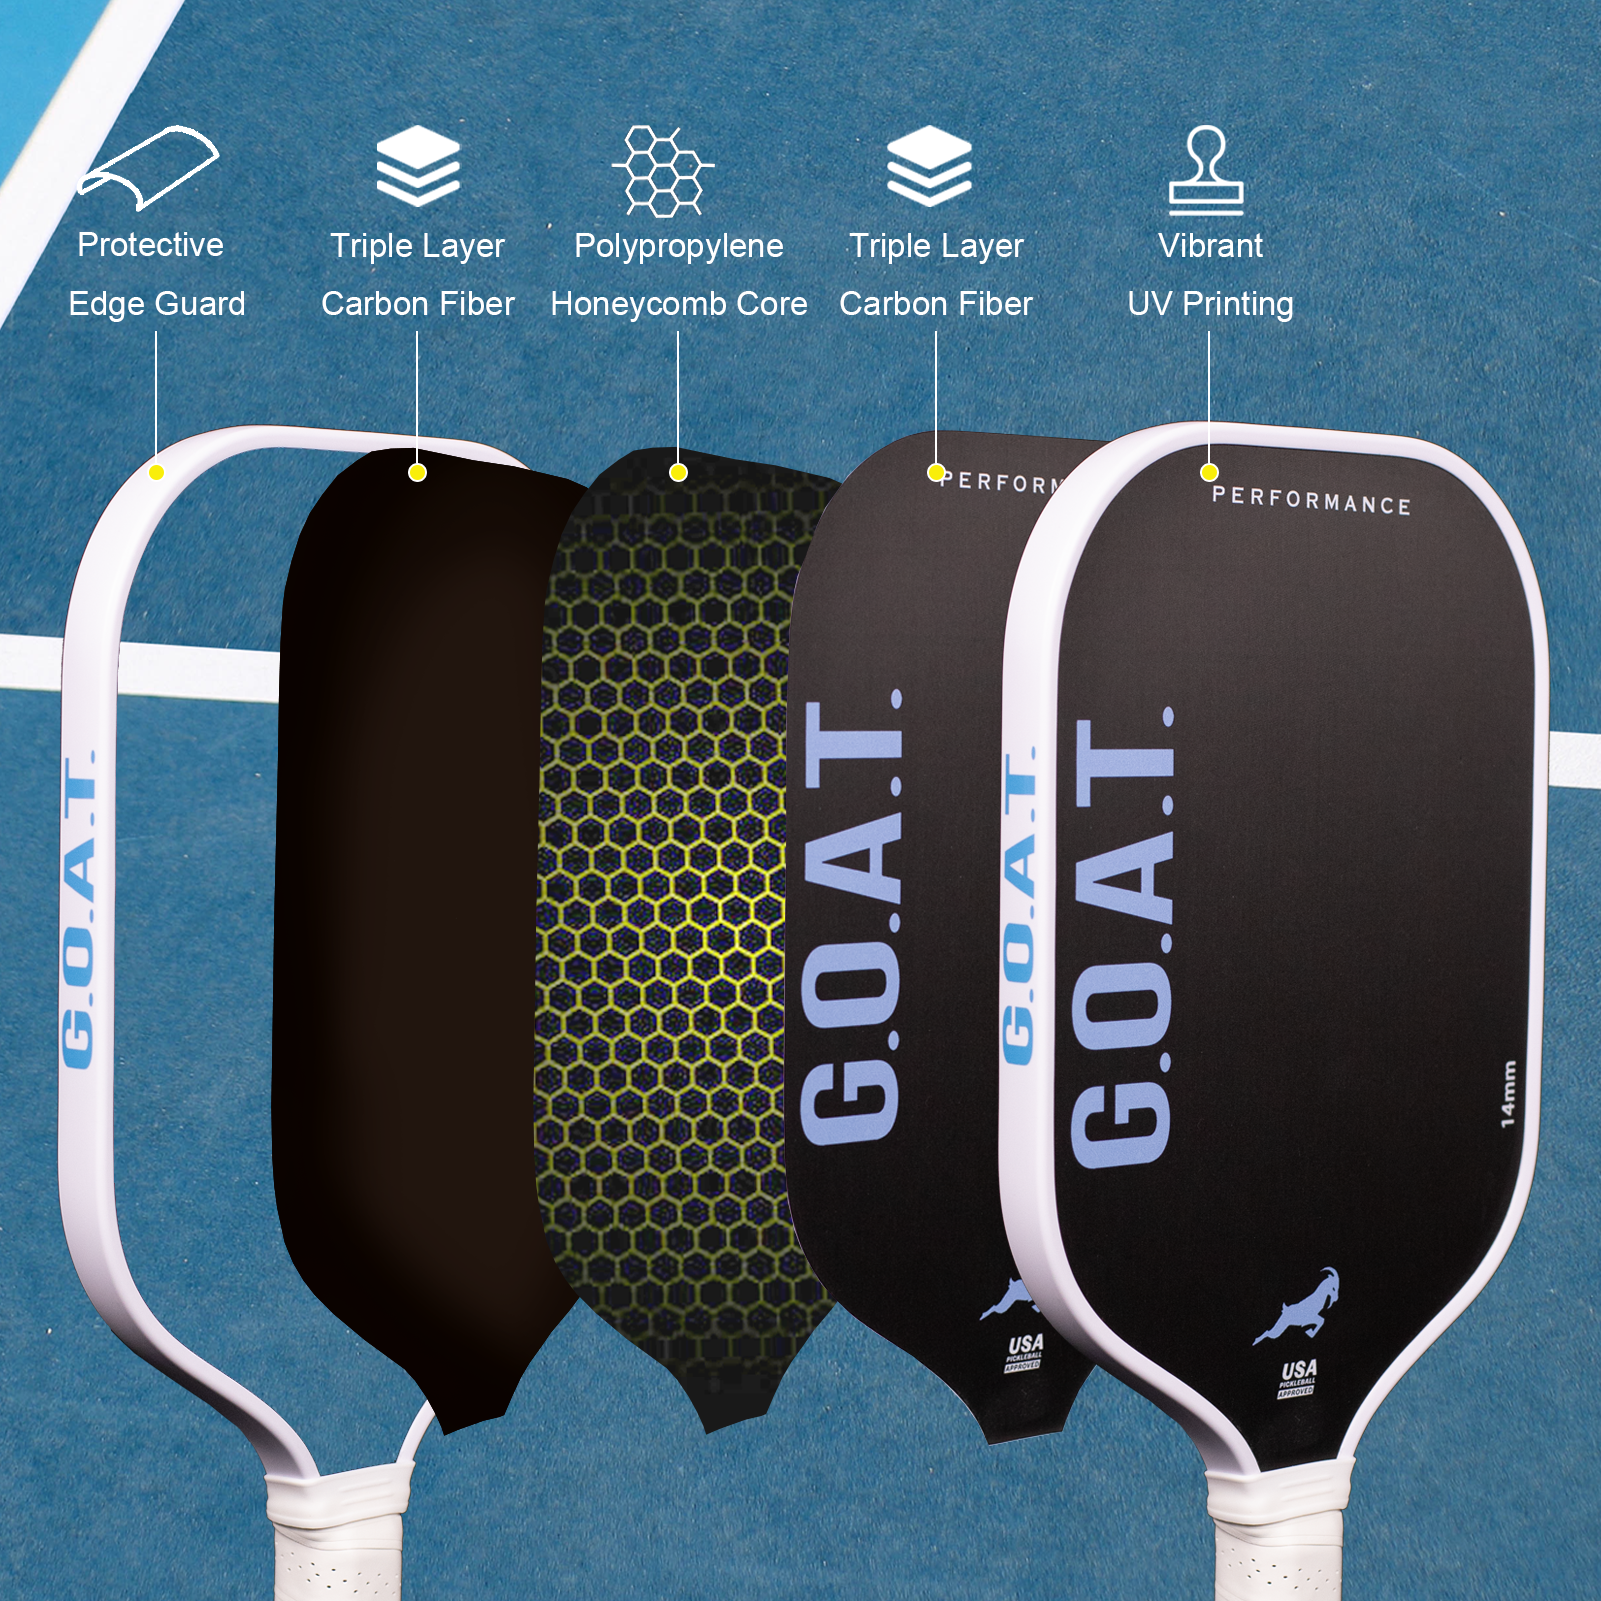 GOAT Performance Pickleball Paddle infographic: Ultra-light, 3-layer carbon fiber paddle on white. Features edge guard, honeycomb core, sunset blue. Key features Vibrant UV Printing, Polypropylene Honeycomb Core, Protective Edge Guard.